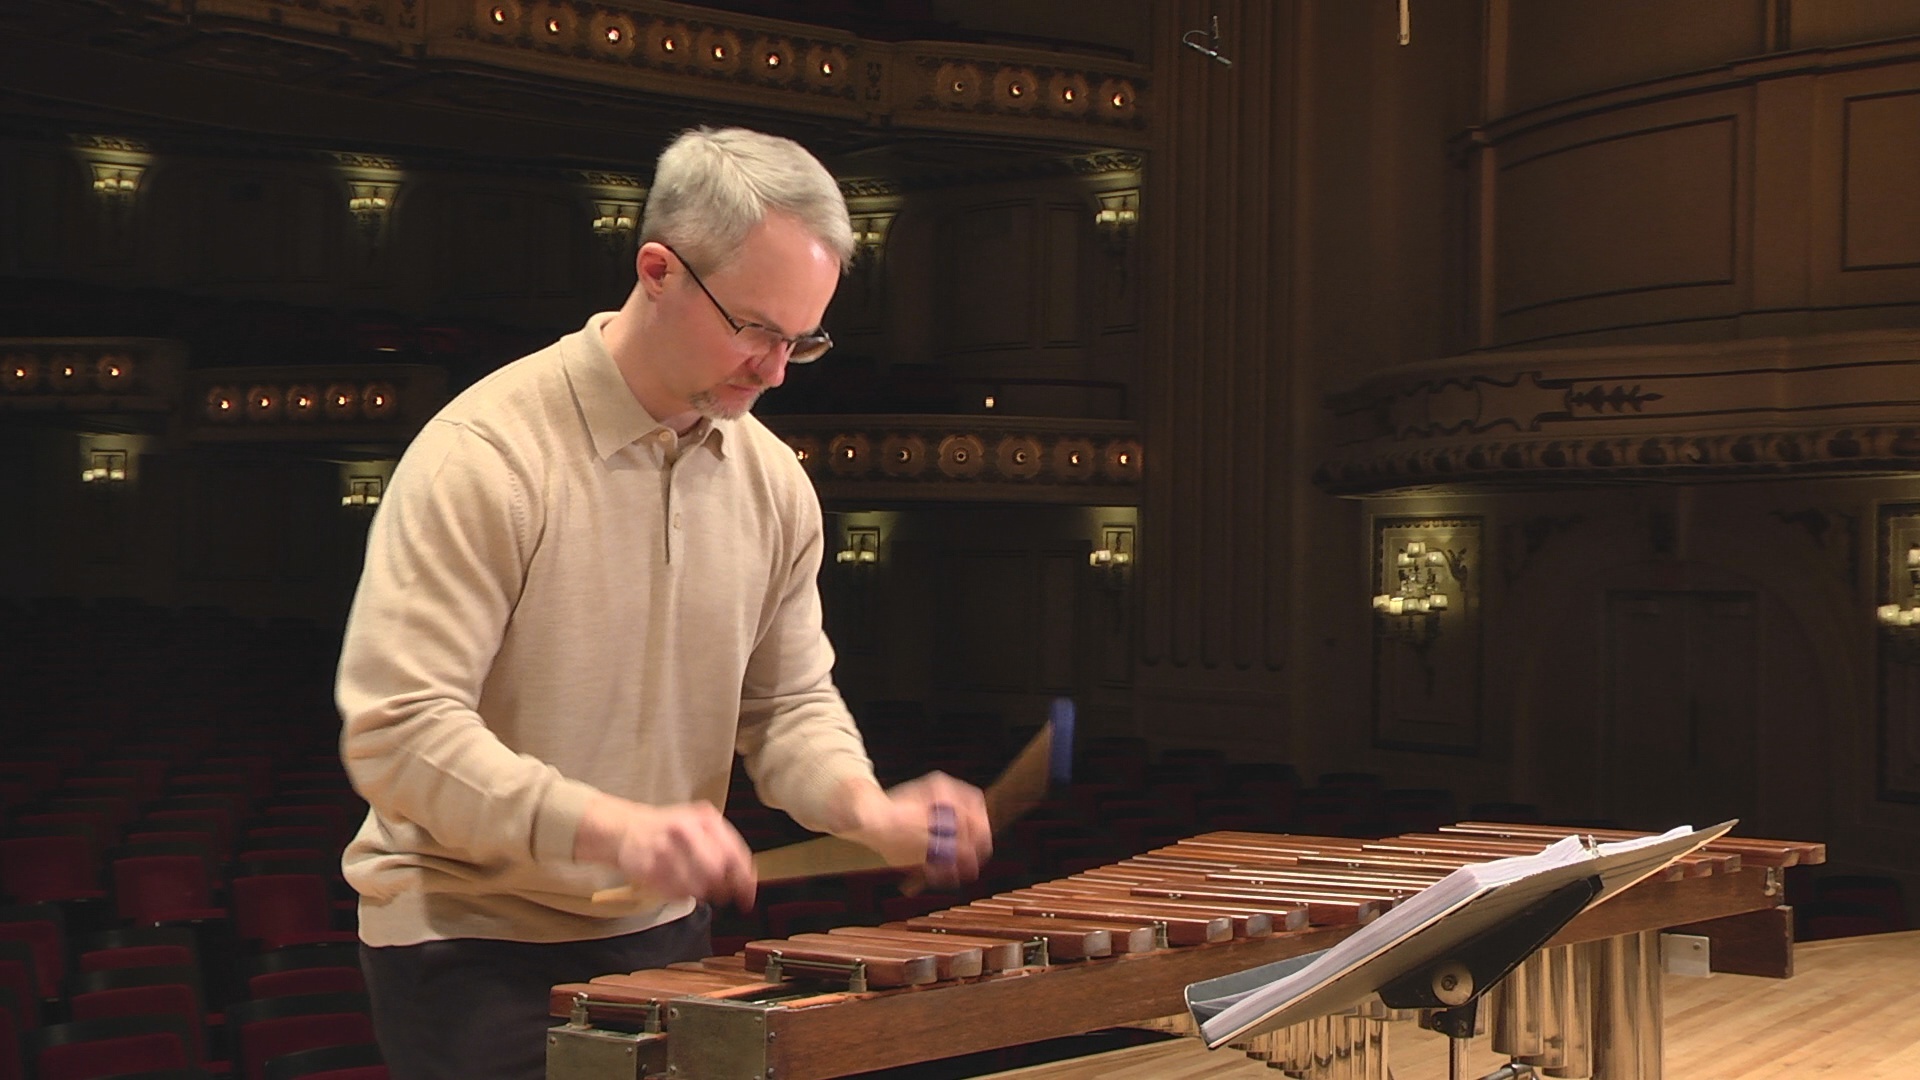 Xylophone: Idiophone, William James, Professional Percussionist, St. Louis Symphony Orchestra. 1920x1080 Full HD Background.